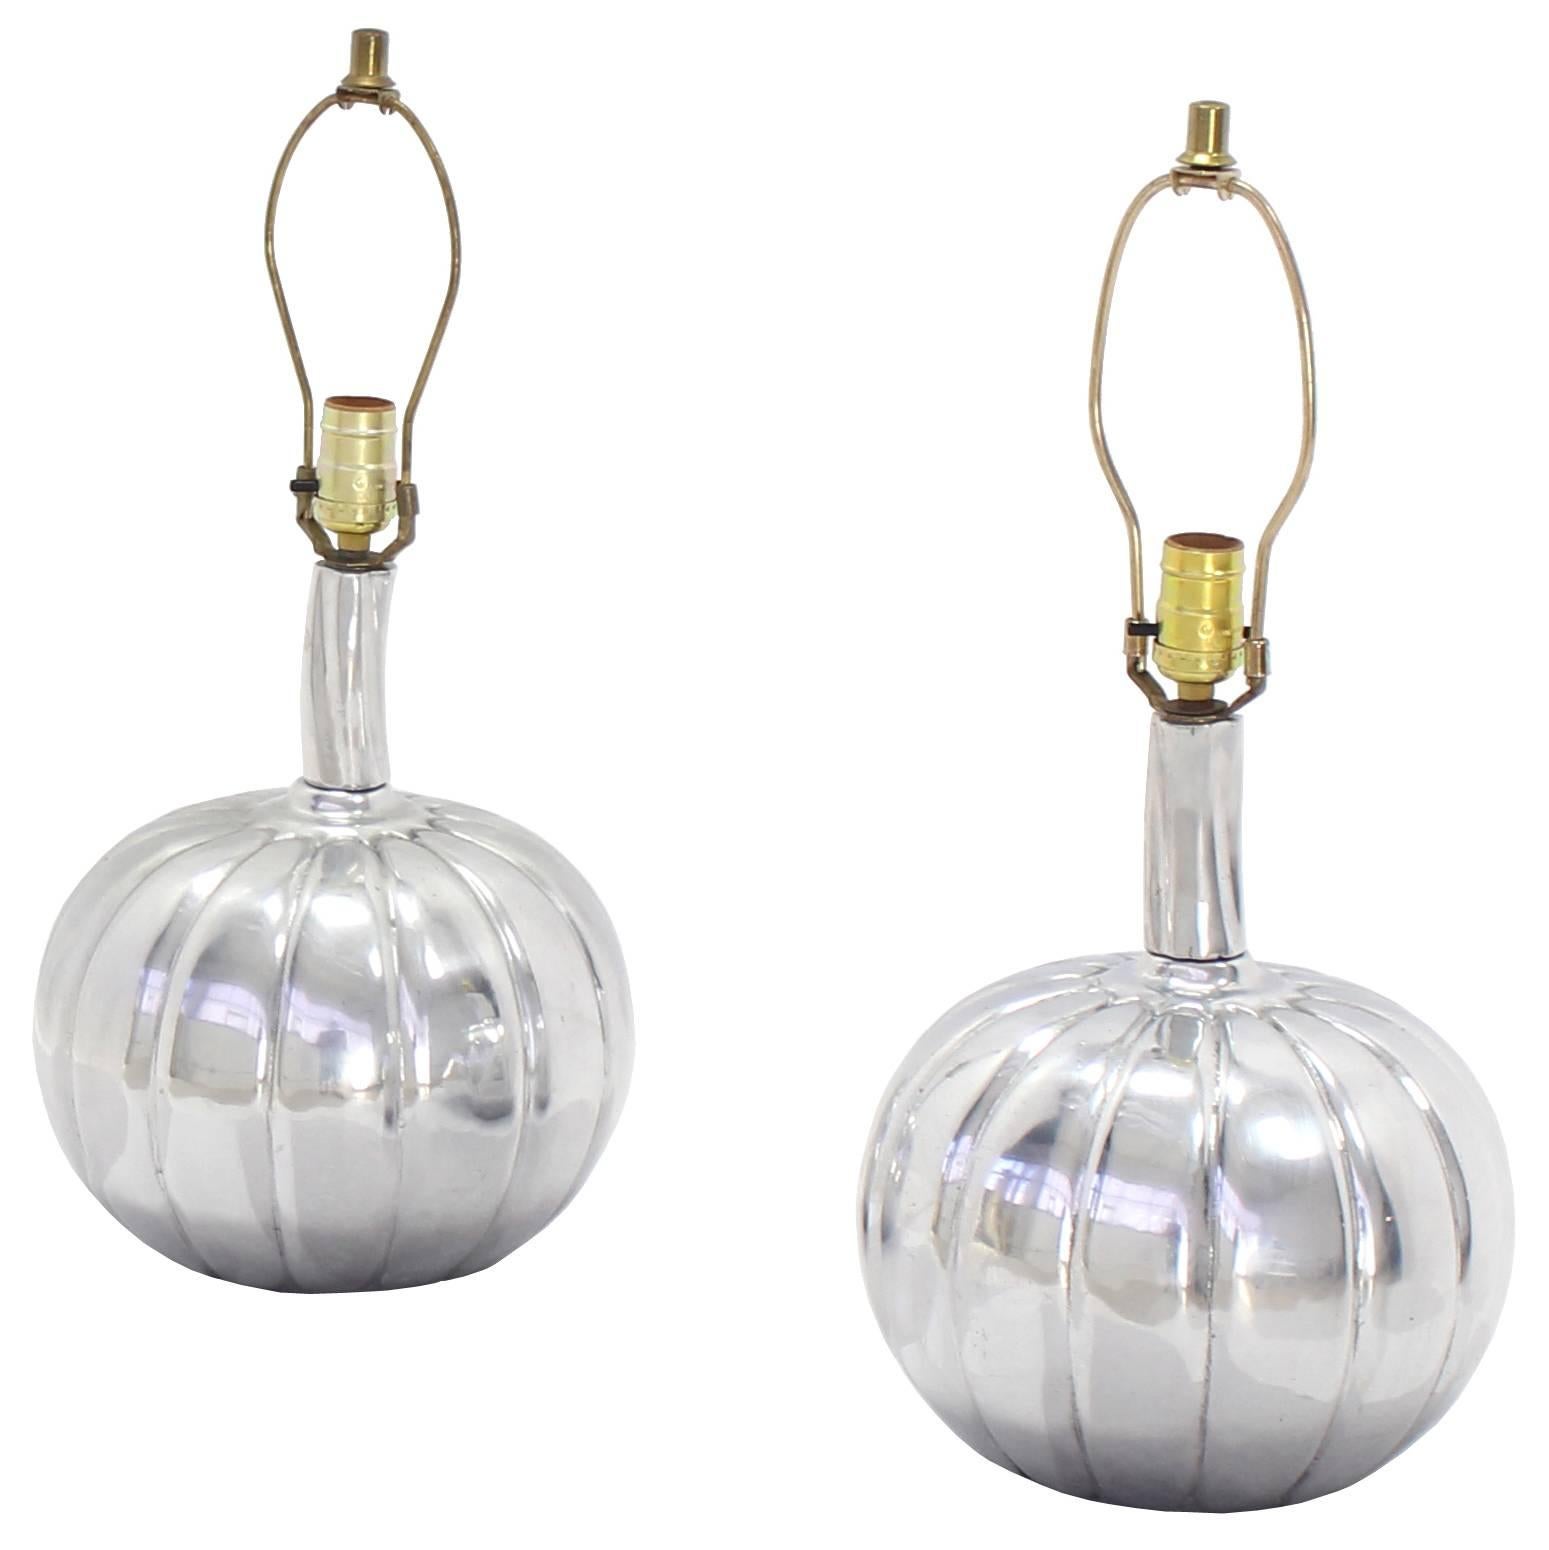 Pair of Stunning Metal Pumpkin Shape Table Lamps For Sale